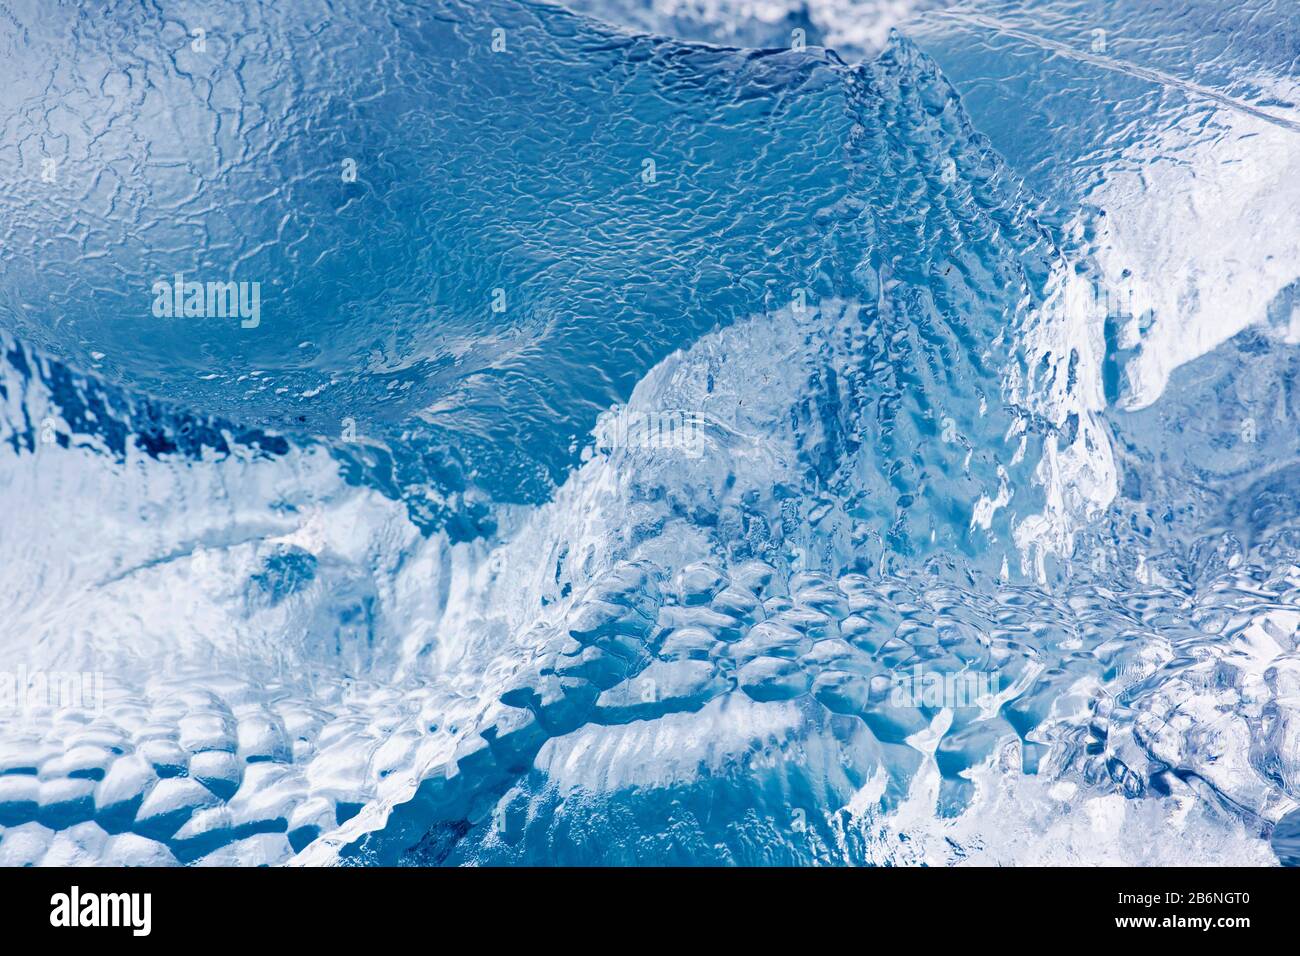 Abstract pattern in melting ice floe / iceberg showing texture due to meltwater / melt water Stock Photo